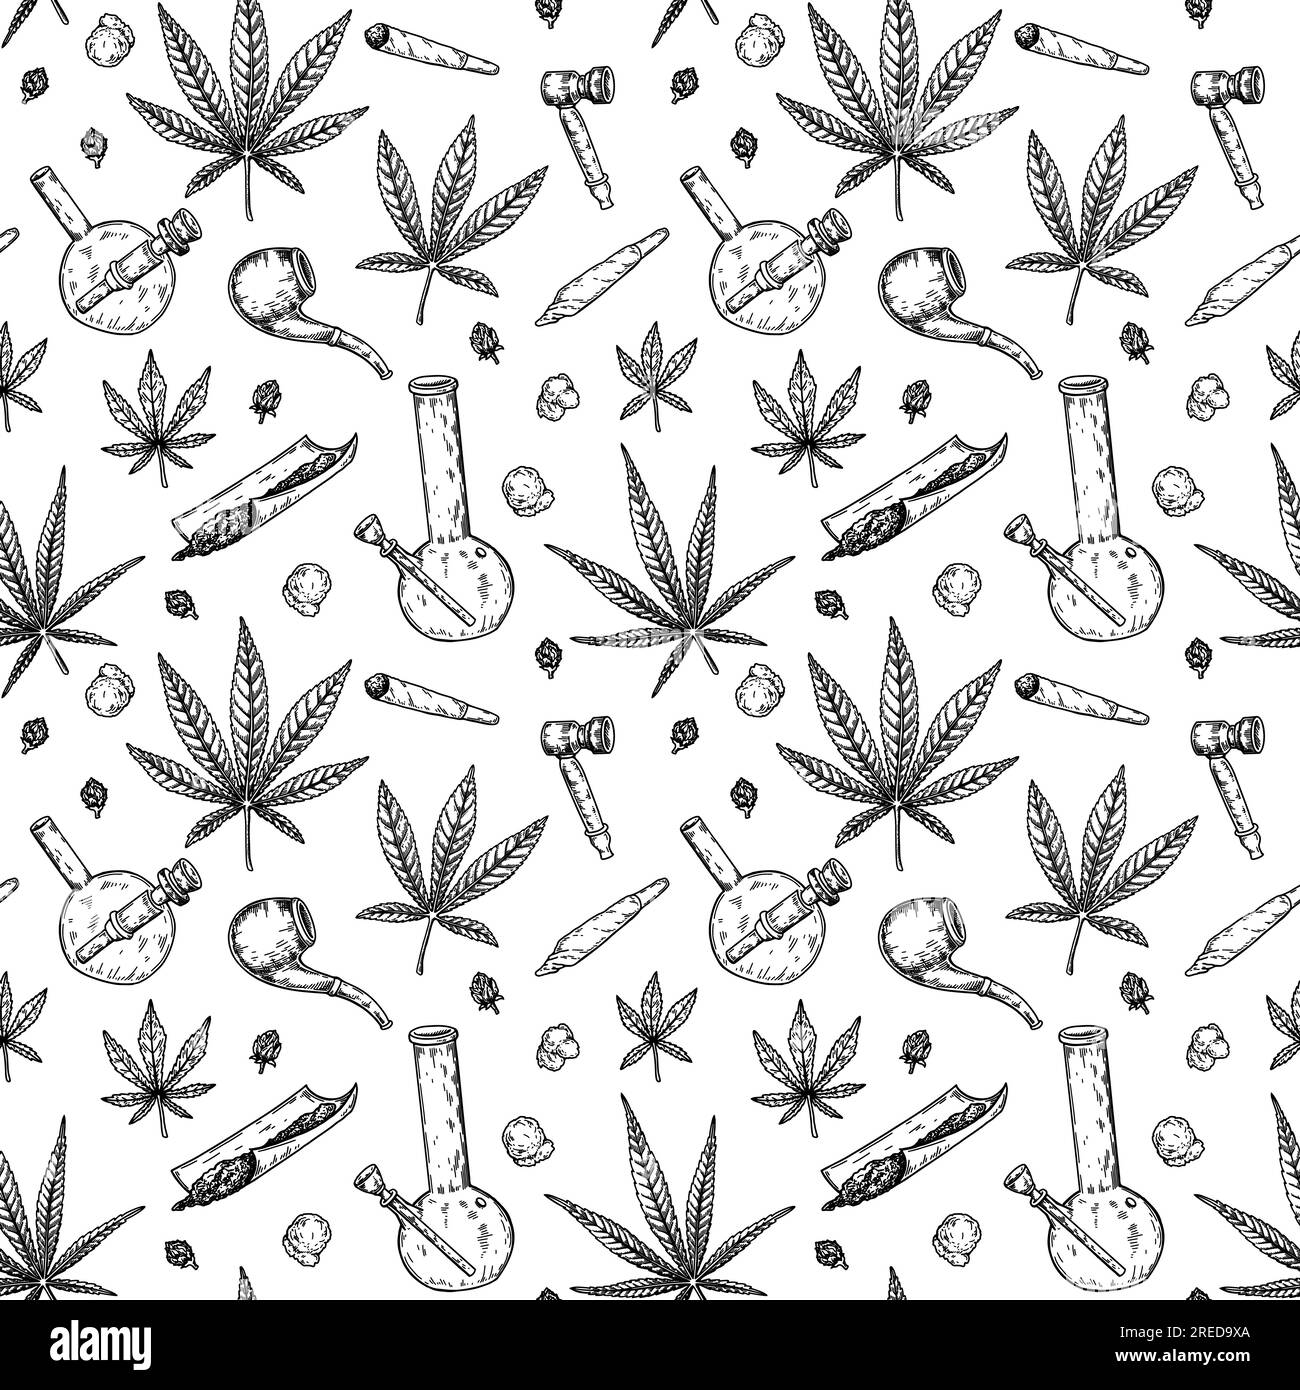 Cannabis leaves, bongs and joints seamless pattern. Marijuana hand drawn vintage background. Vector illustration in sketch style. Stock Vector